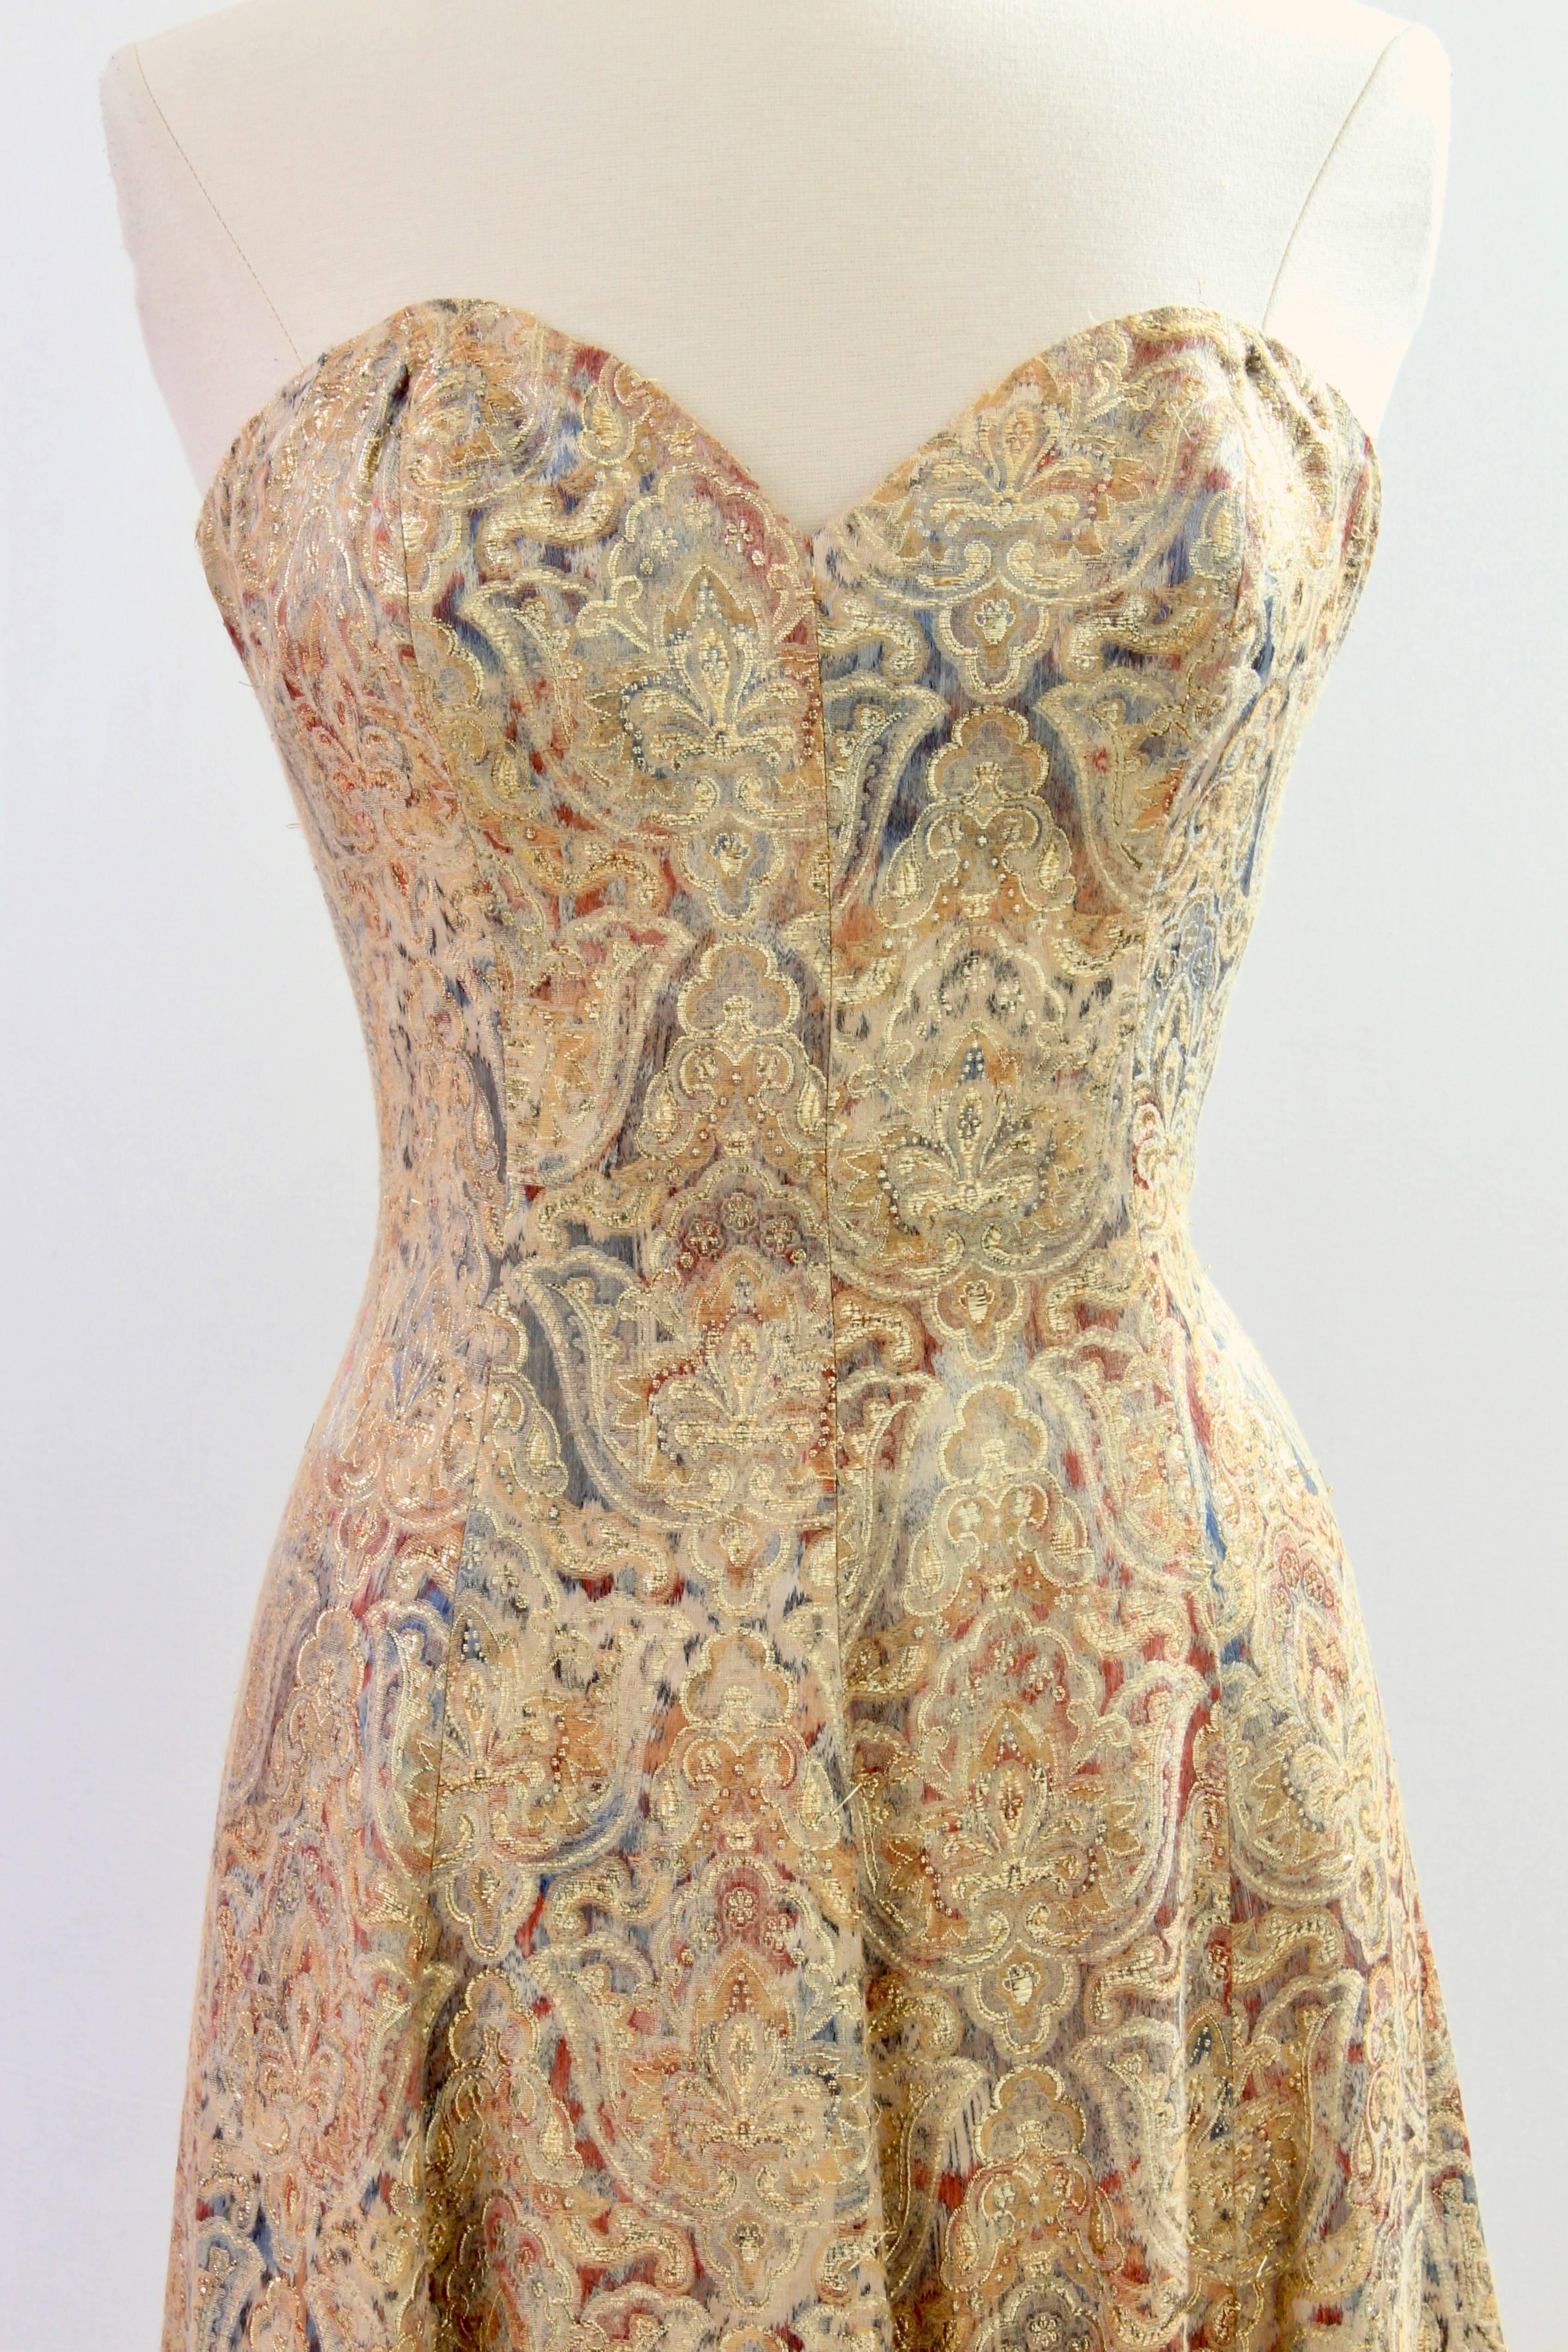 This pretty evening gown was made by Victor Costa for Neiman Marcus, most likely in the 1990s.  Made from a linen blend floral brocade with gold lurex thread detailing, it fastens with an inner corset and rear zipper and is fully-lined.  In good